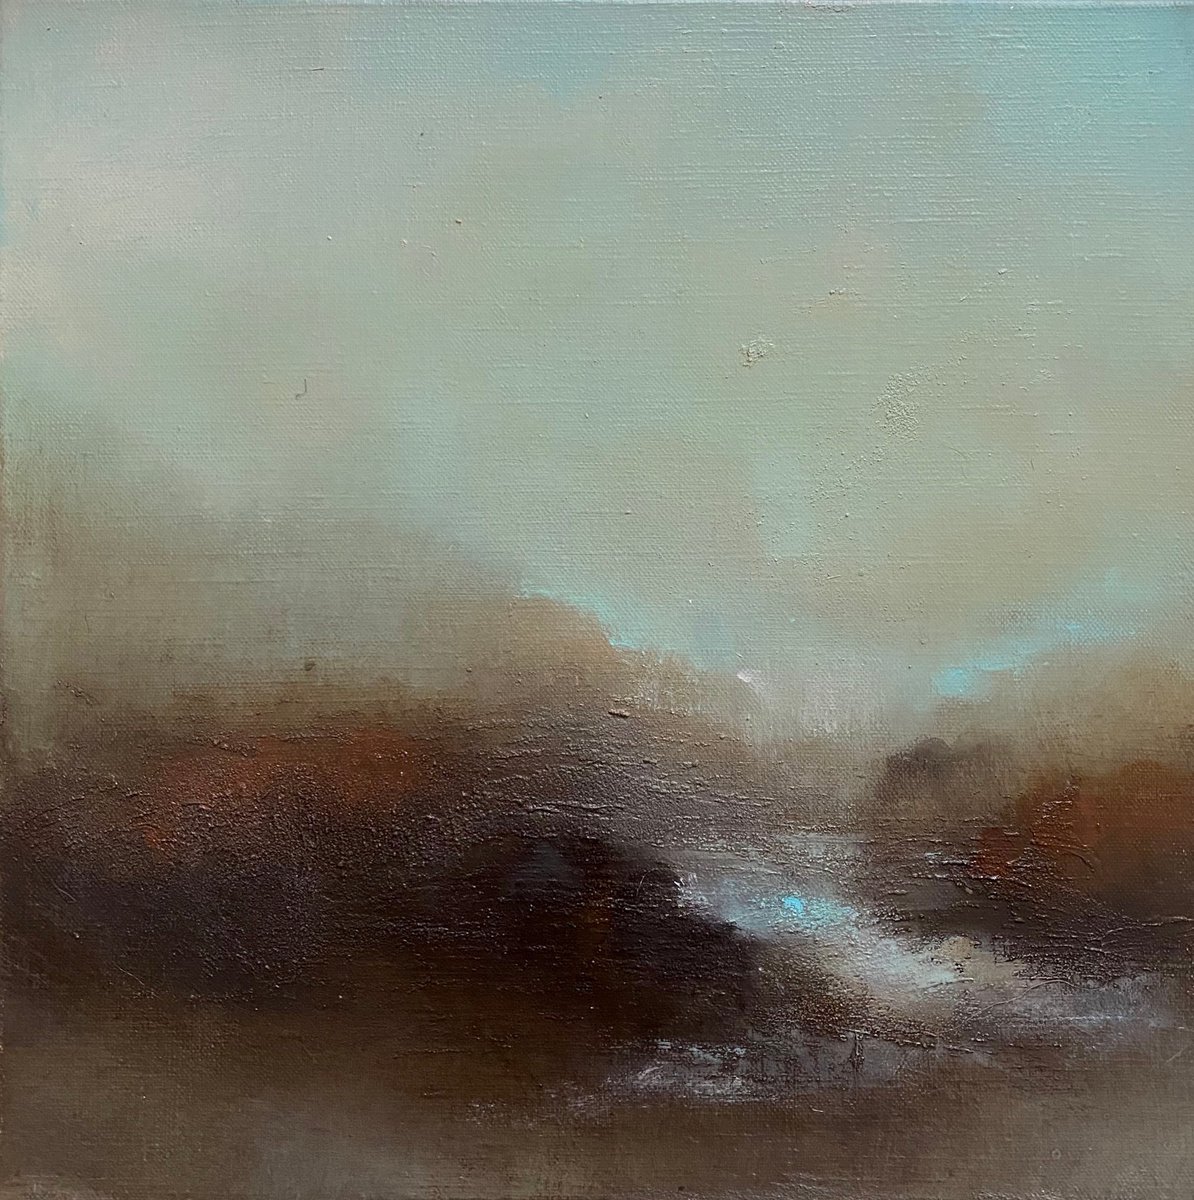 At the intersection of realities 30x30 cm - gold particles original oil painting landscap... by Elena Troyanskaya